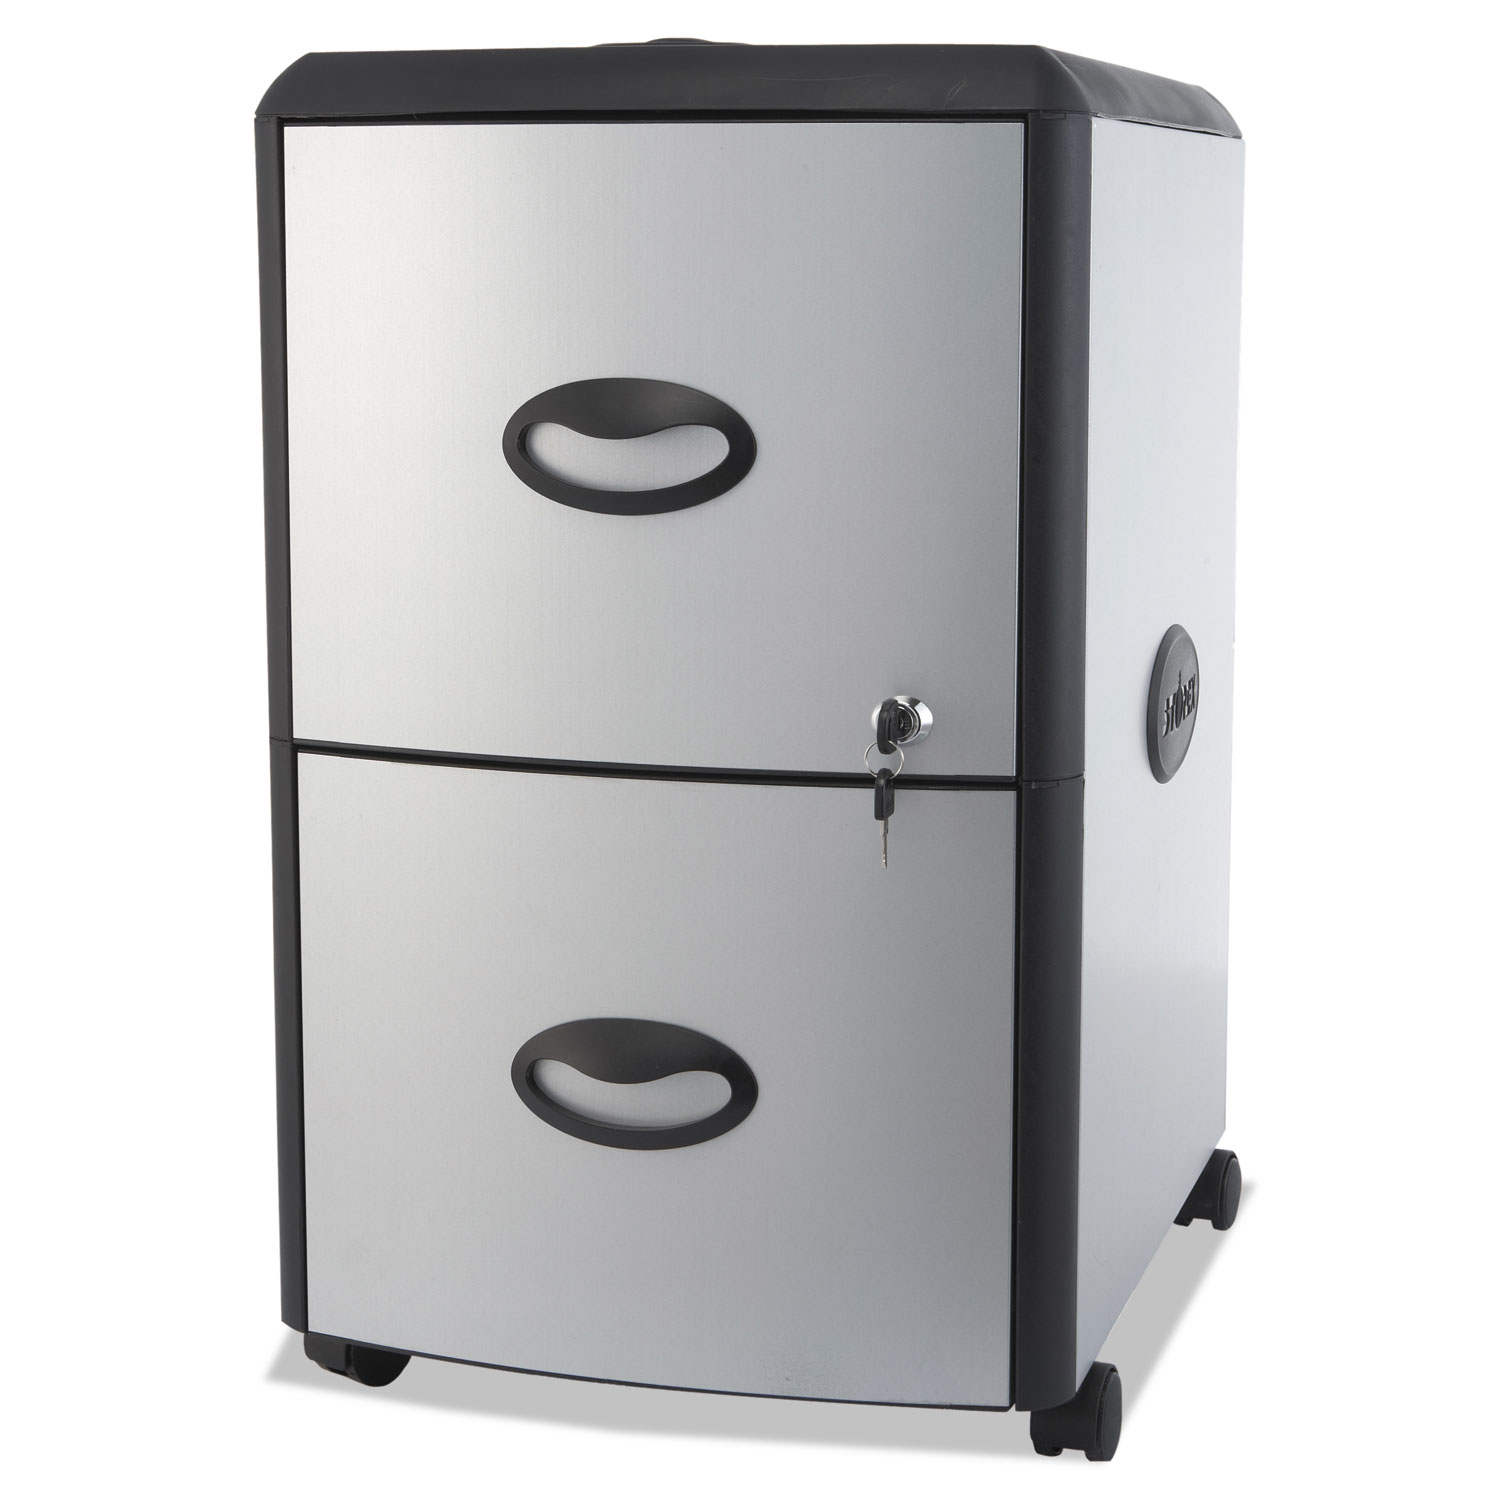 Two-Drawer Mobile Filing Cabinet With Metal Siding, 19 x 15 x 23, Silver/Black